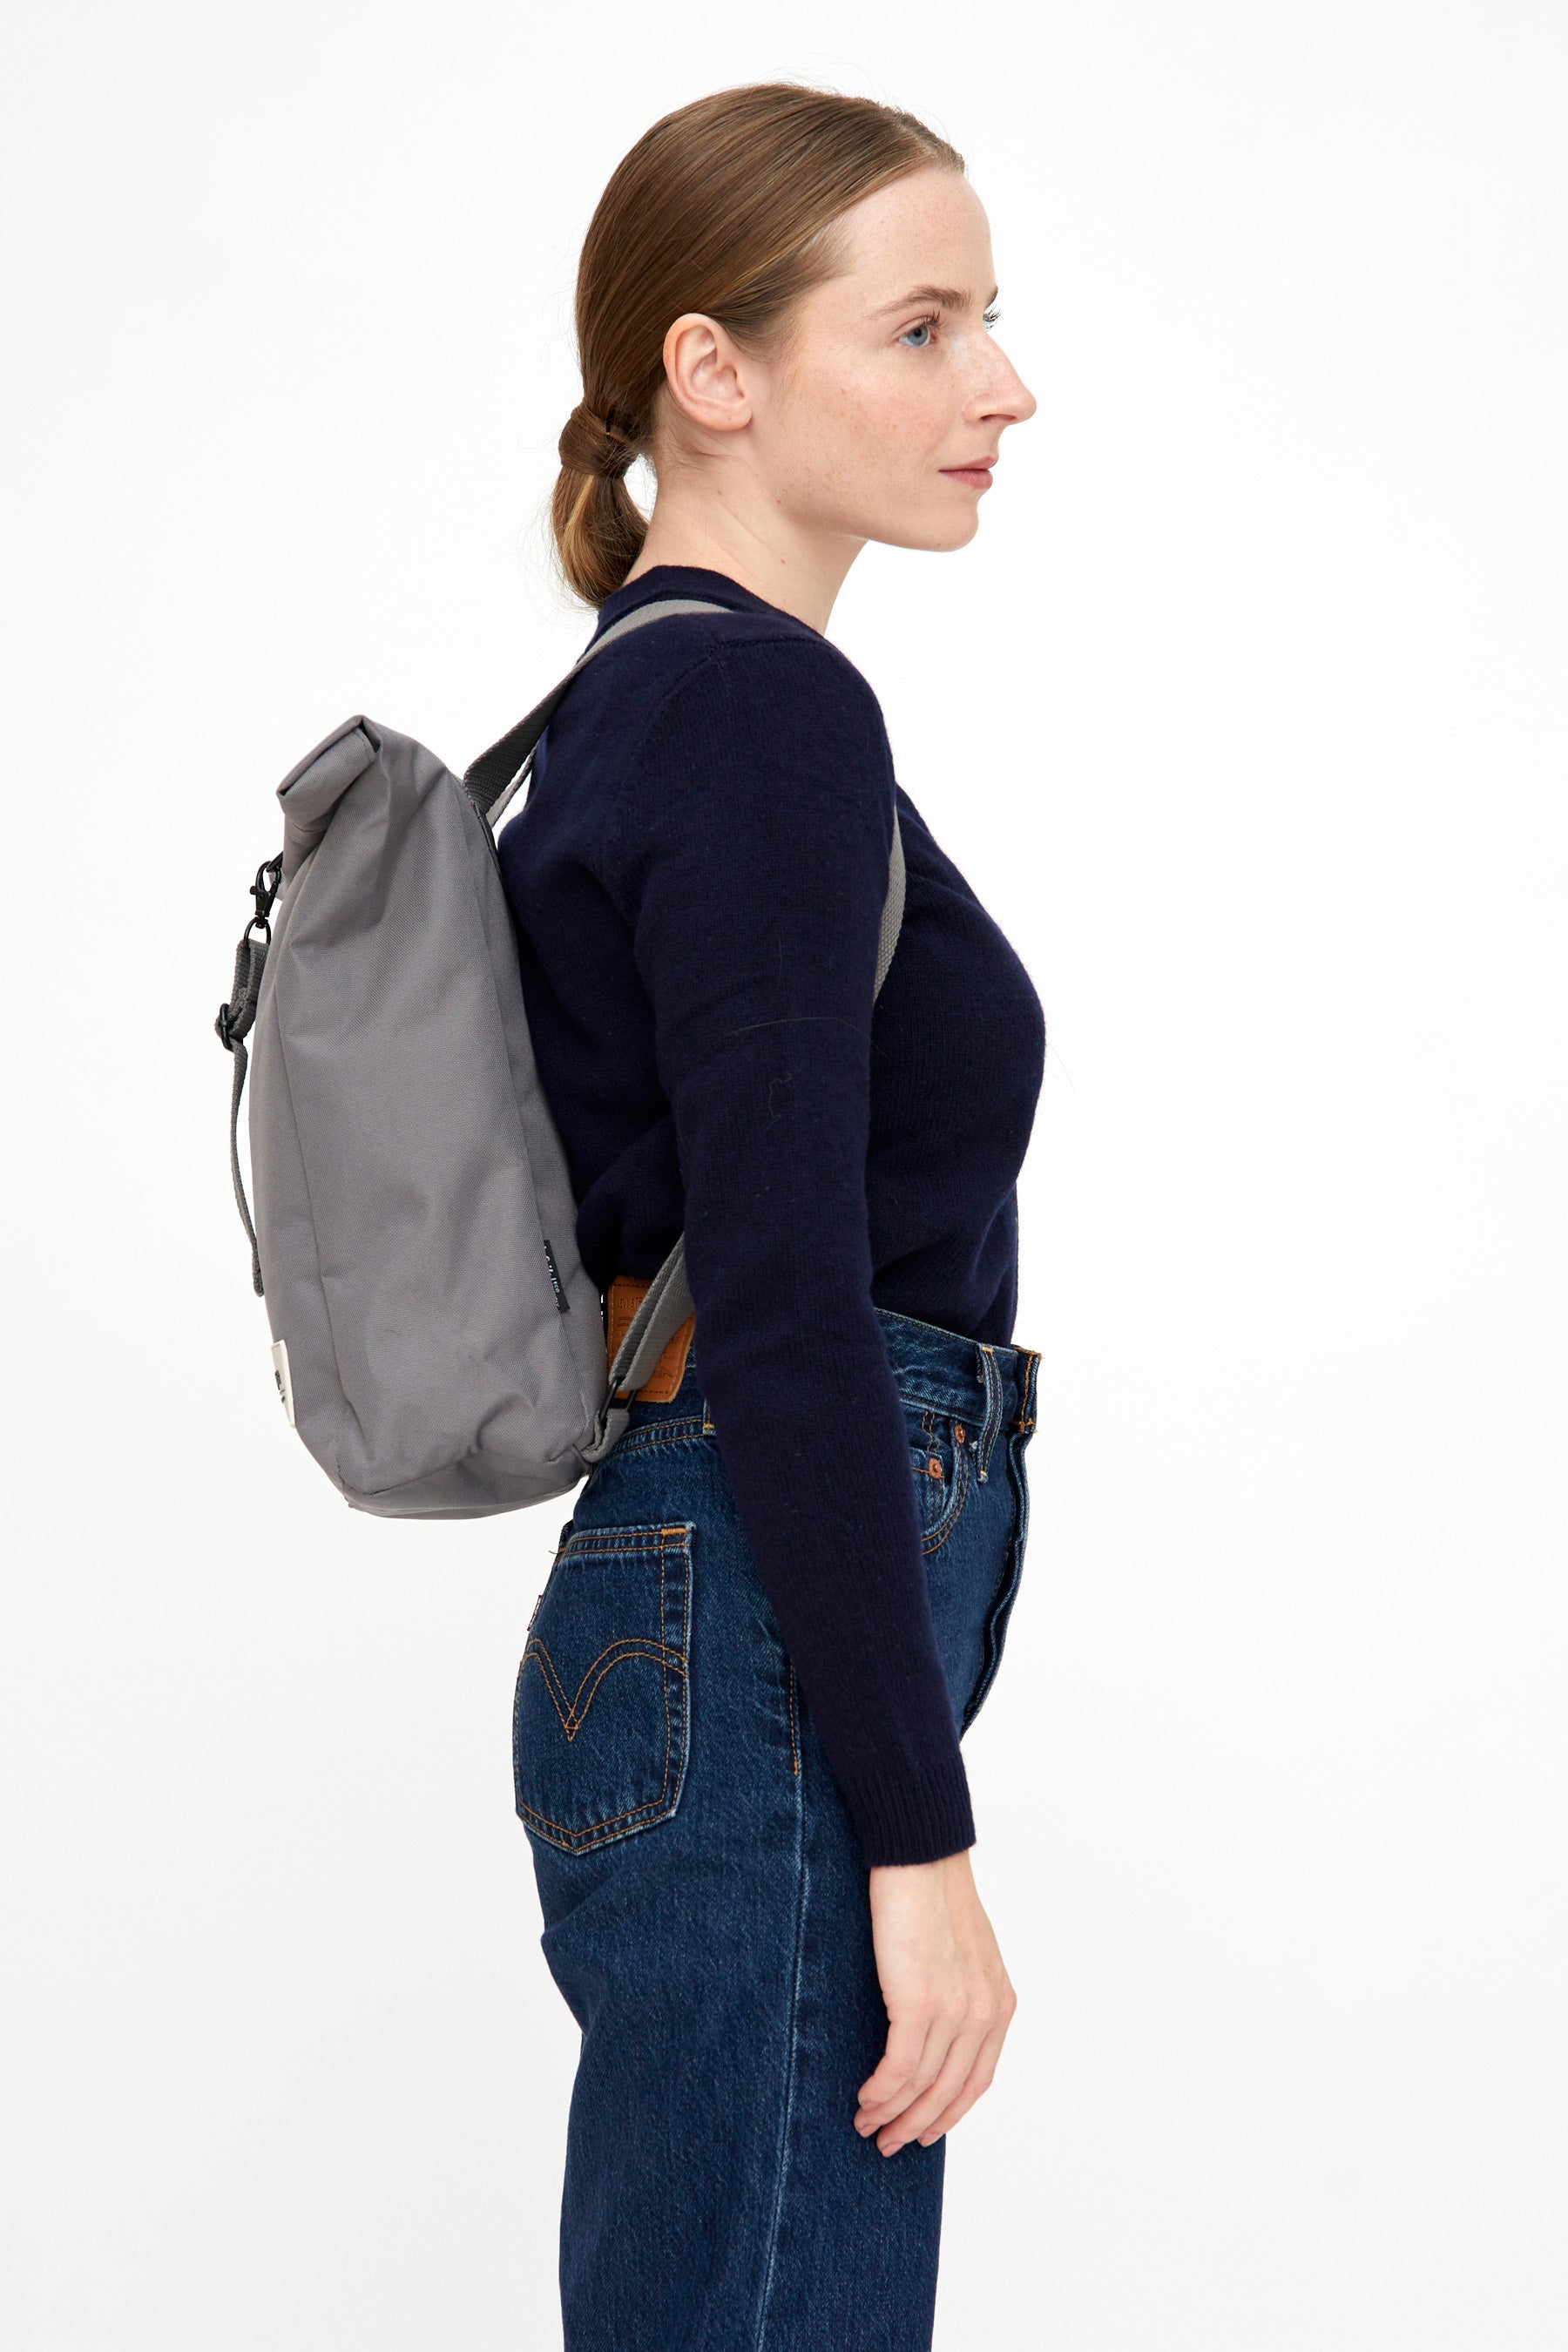 Gray Roll Mini backpack (12l) made from recycled PET plastic bottles from Lefrik